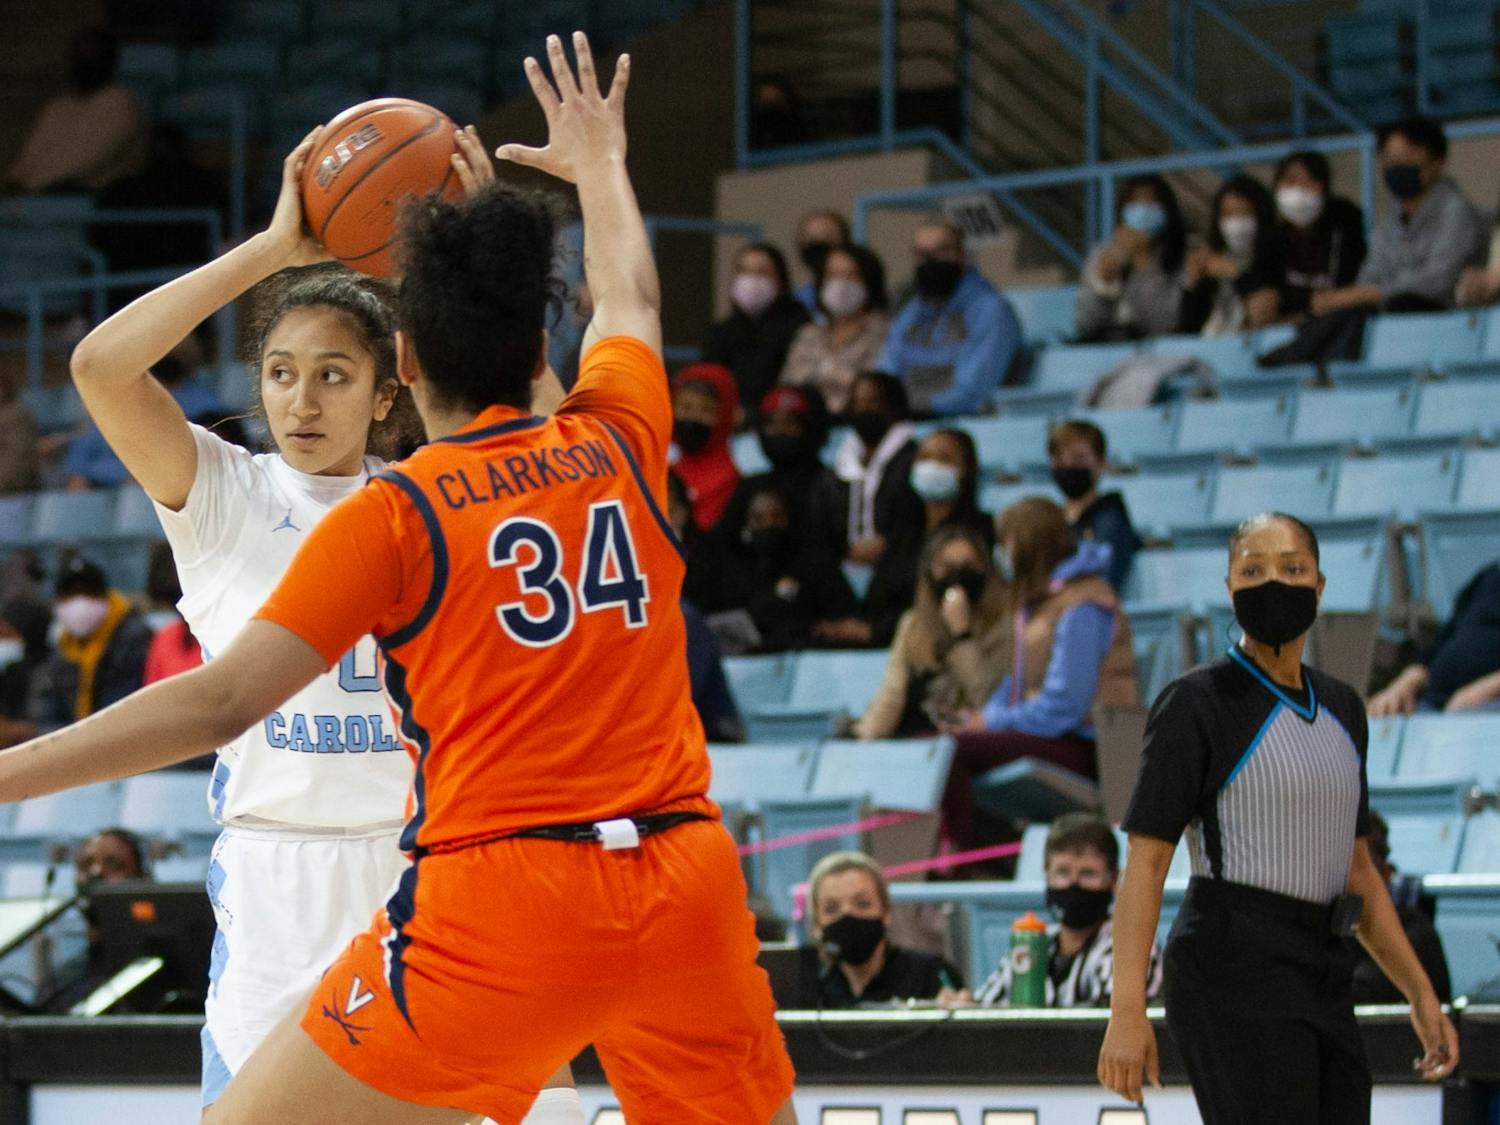 UNC sophomore forward Alexandra Zelaya (0) is guarded by a Virginia player at the game against UVA at Carmichael Arena on Jan. 20 2022. The Tar Heels' beat the Cavaliers 61-52.